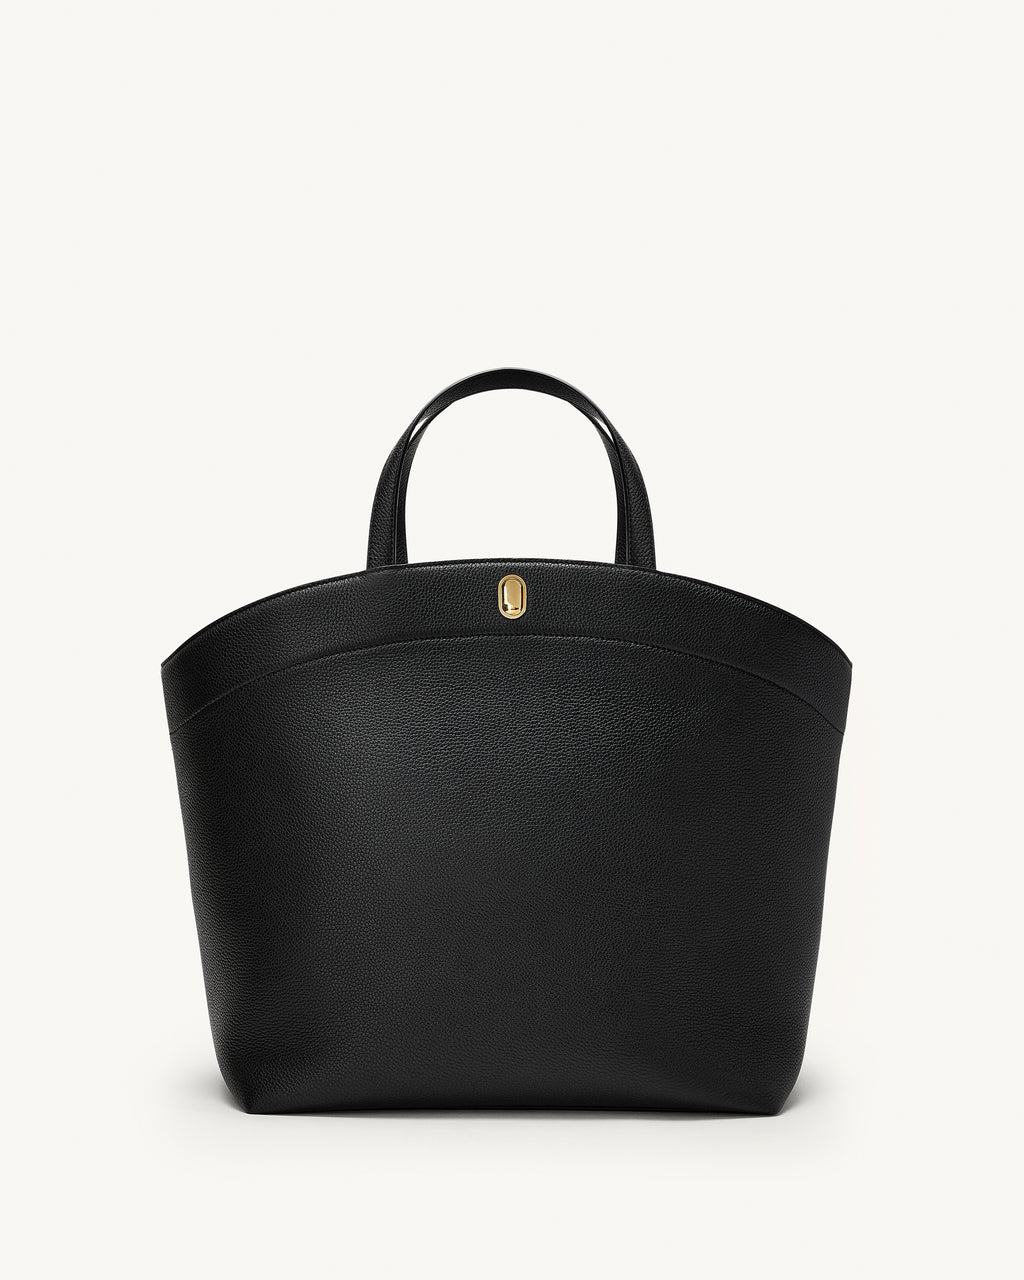 Large Tondo Tote in Black Grained Leather